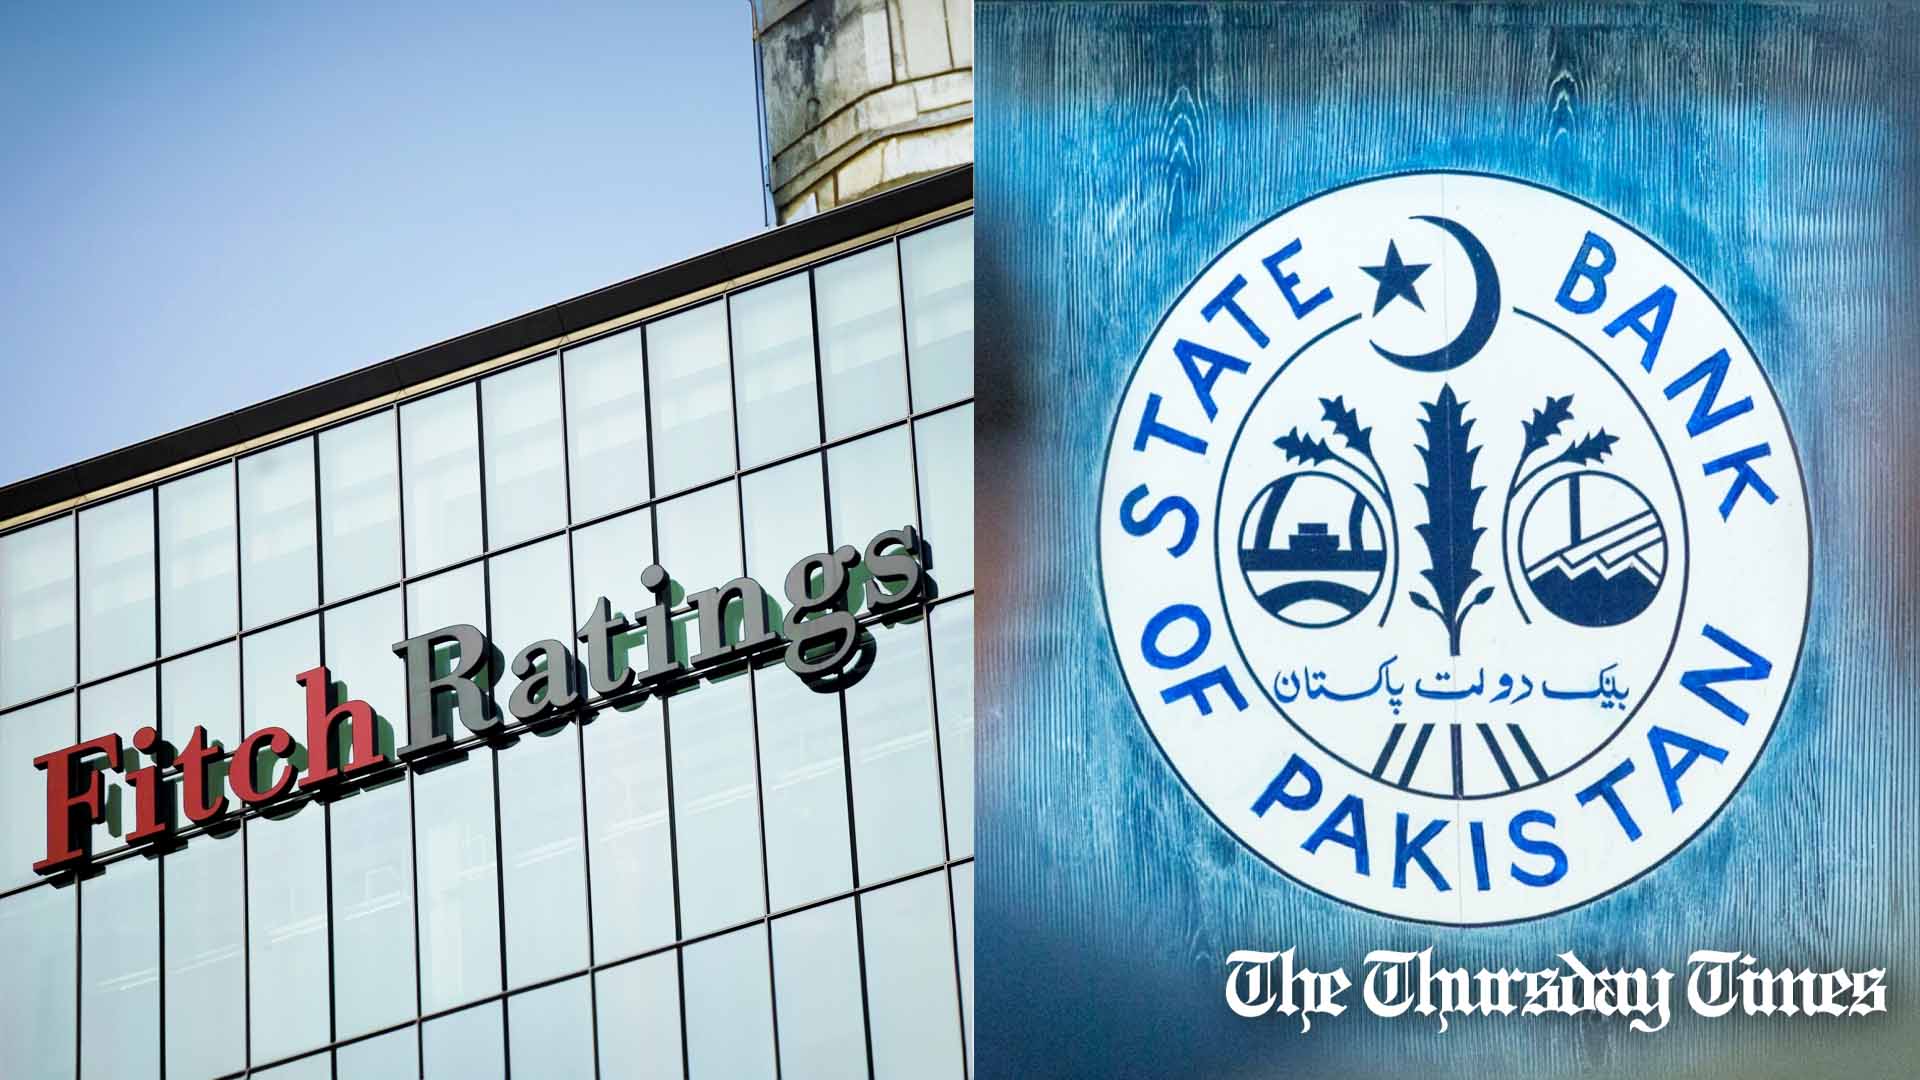 A combined file photo is shown of Fitch Ratings' London offices (L) and the State Bank of Pakistan emblem at Karachi (R). — FILE/THE THURSDAY TIMES